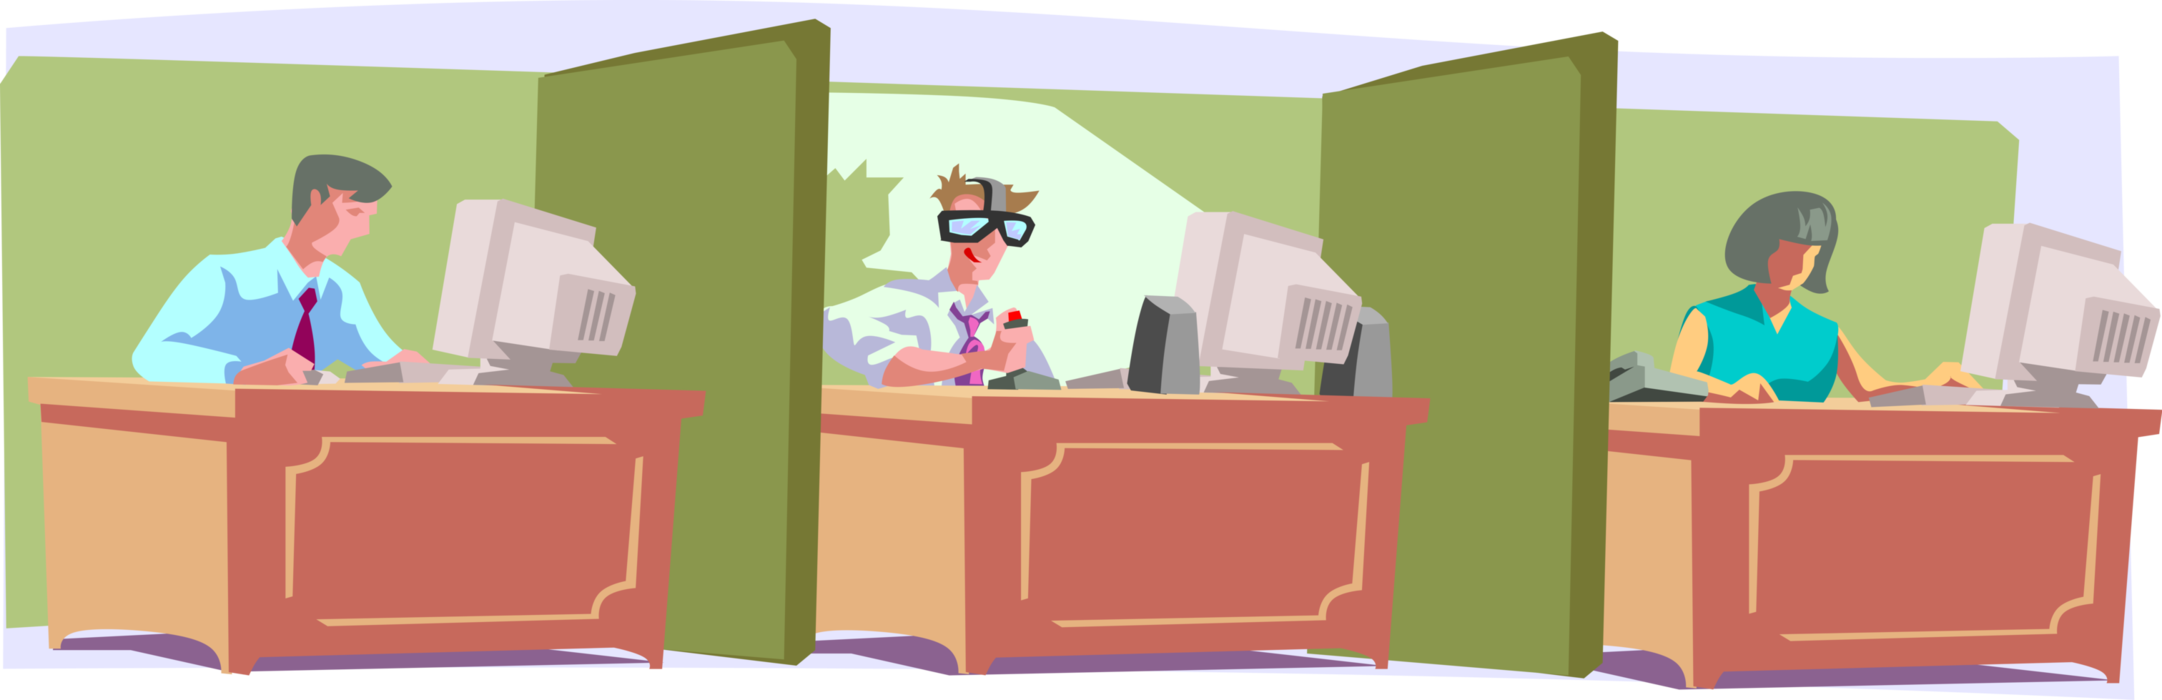 Vector Illustration of Two Office Workers Hard at Work, While Third Goofs Off